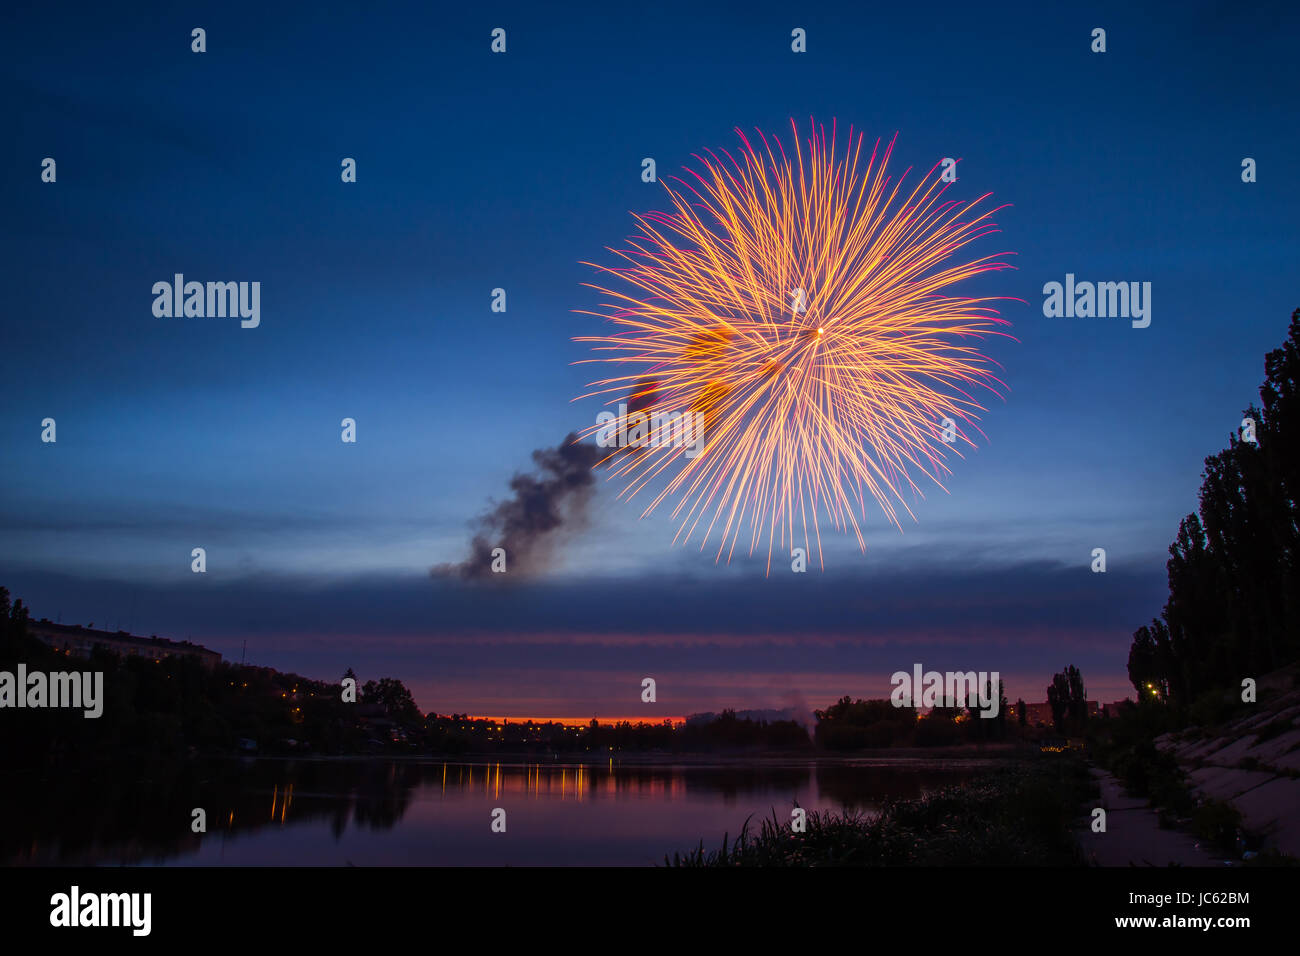 Fireworks Over Lake at Night Stock Photo